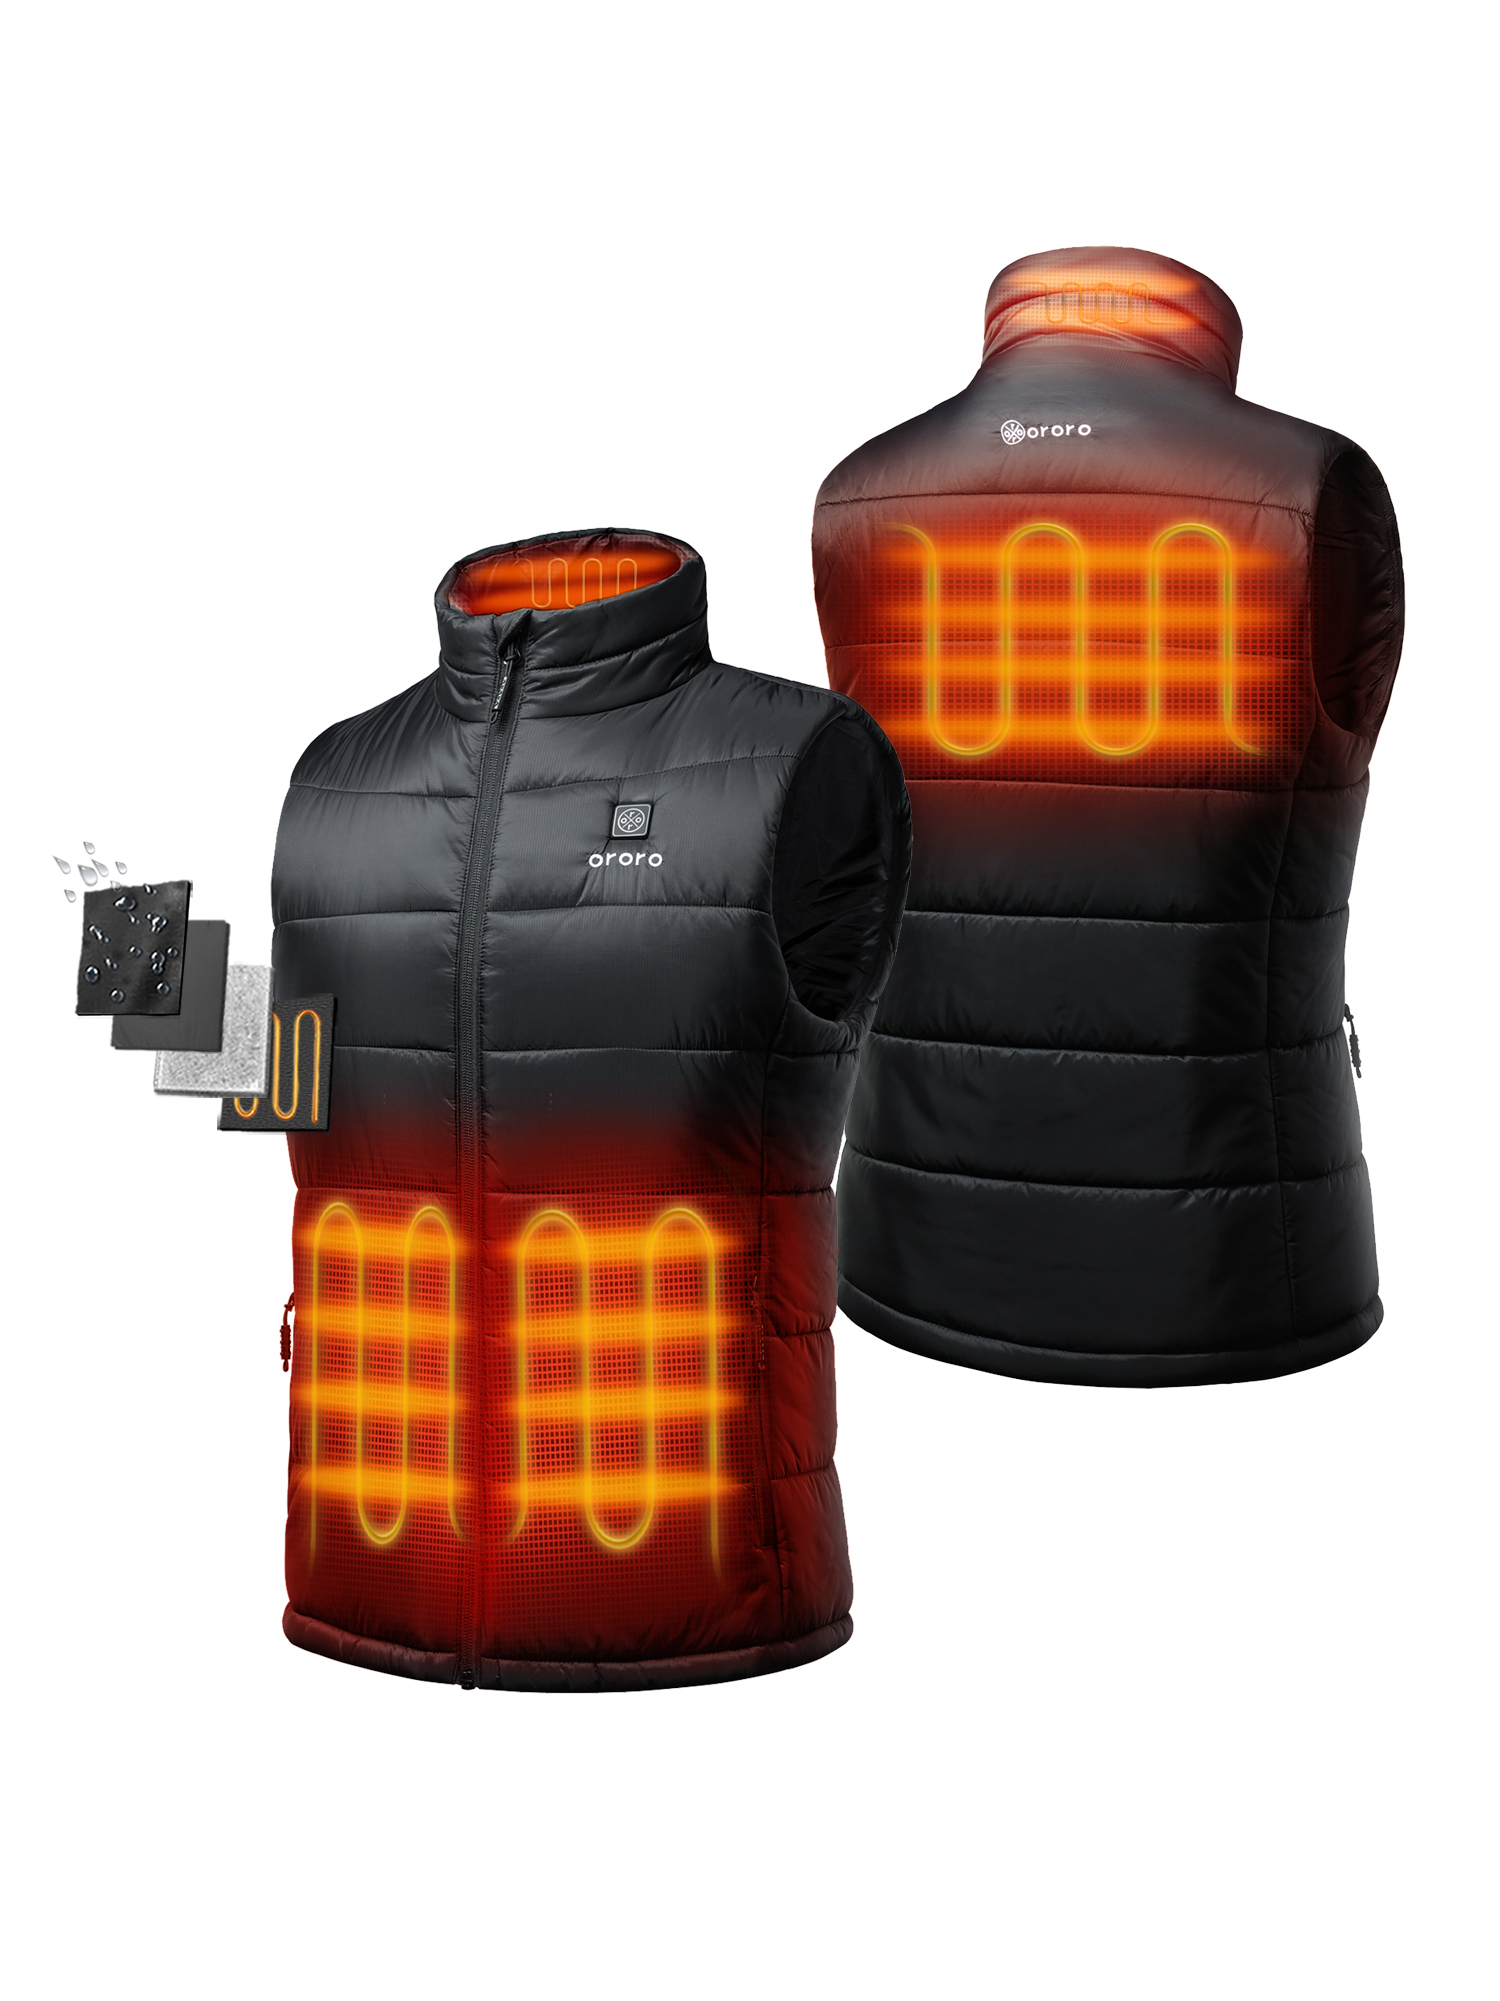 ORORO Men's Heated Vest with Battery, Heating Vest for Hiking Skiing Outdoors (Black, L) - image 3 of 12